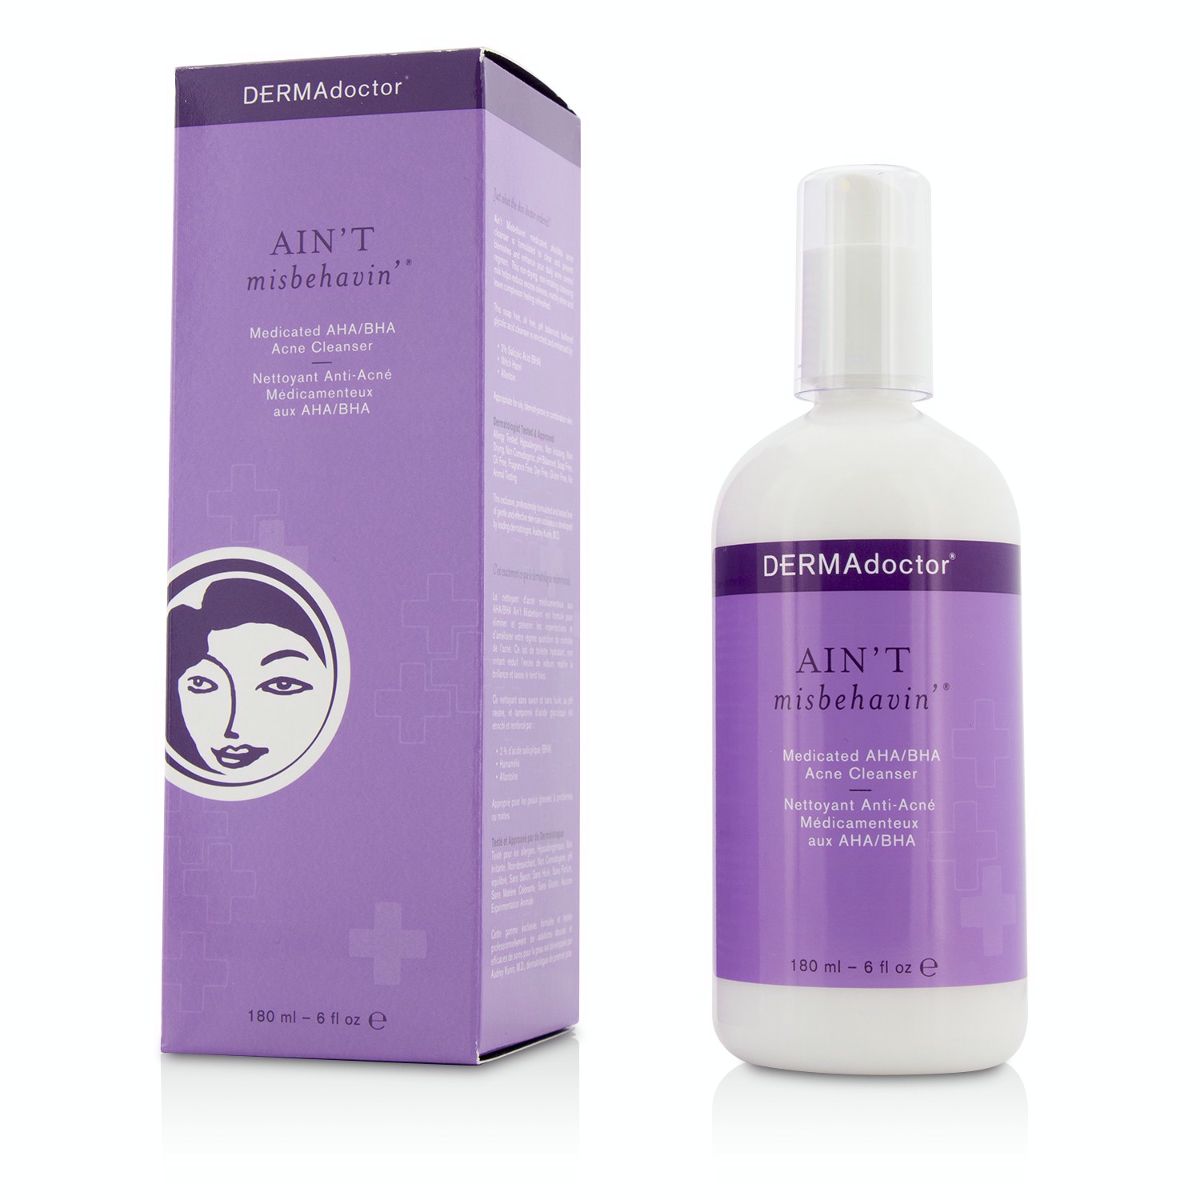 Aint Misbehavin Medicated AHA/BHA Acne Cleanser - For Oily Blemish-Prone or Combination Skin DERMAdoctor Image